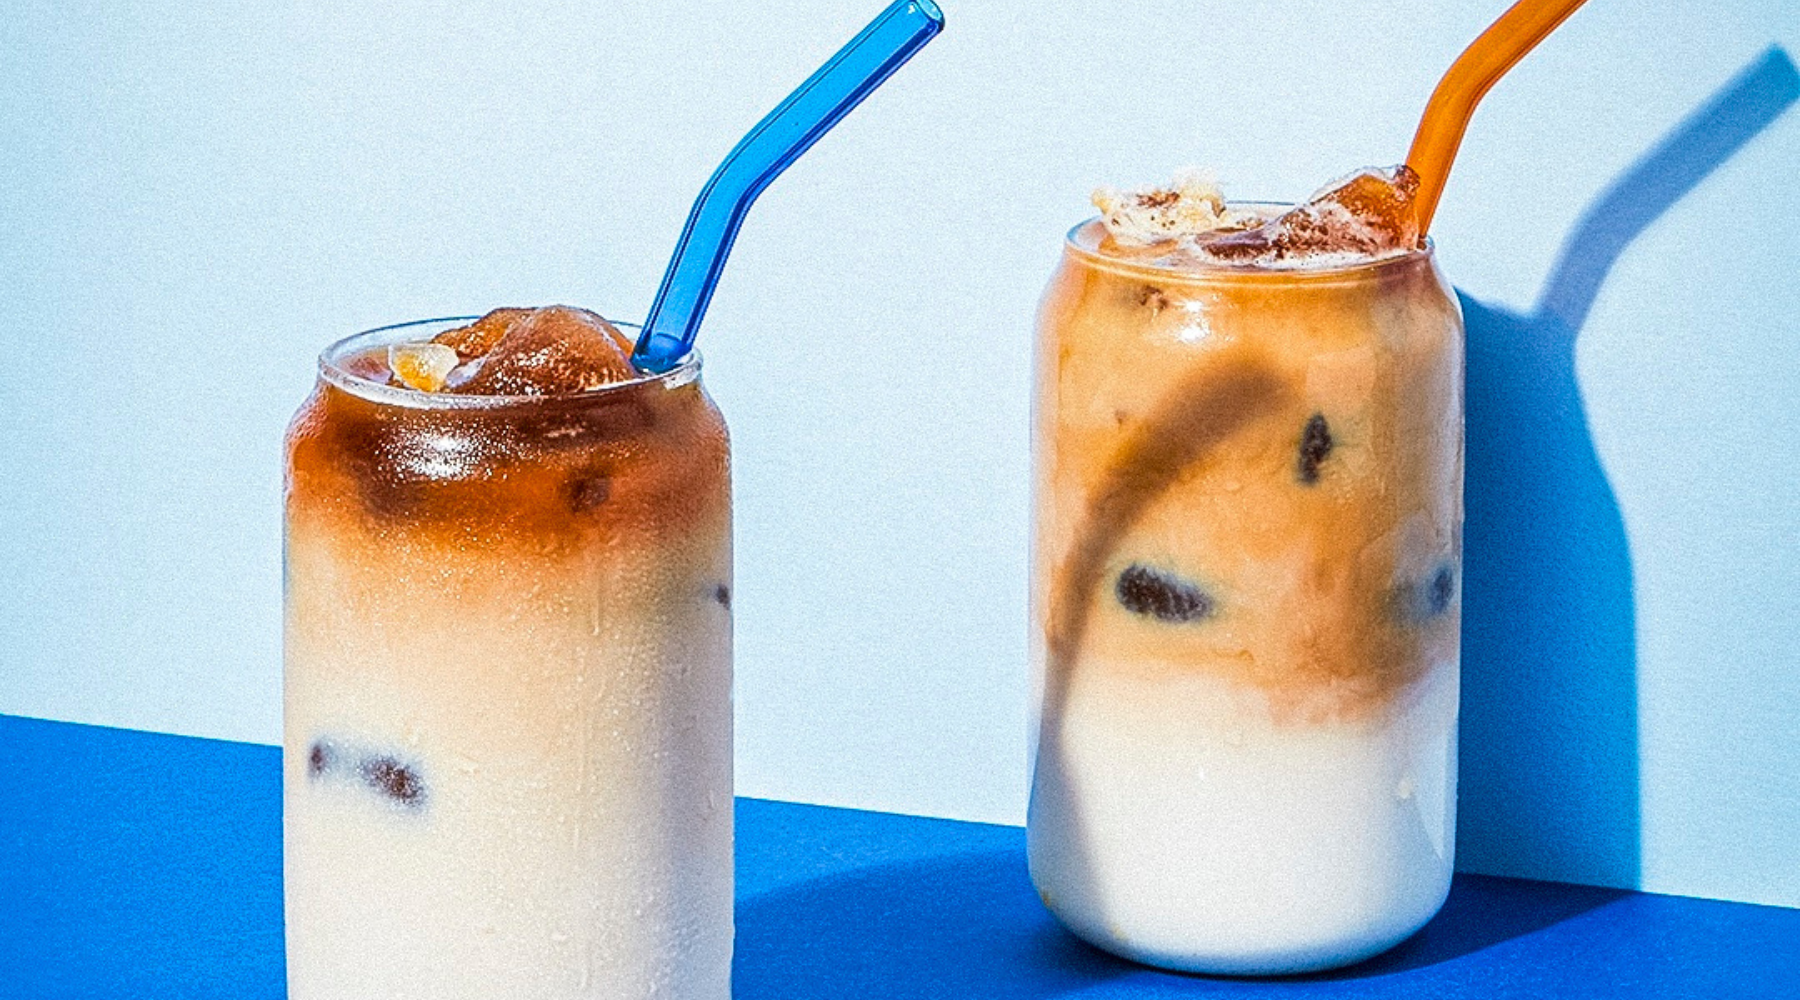 How to easily make Iced Coffee at home